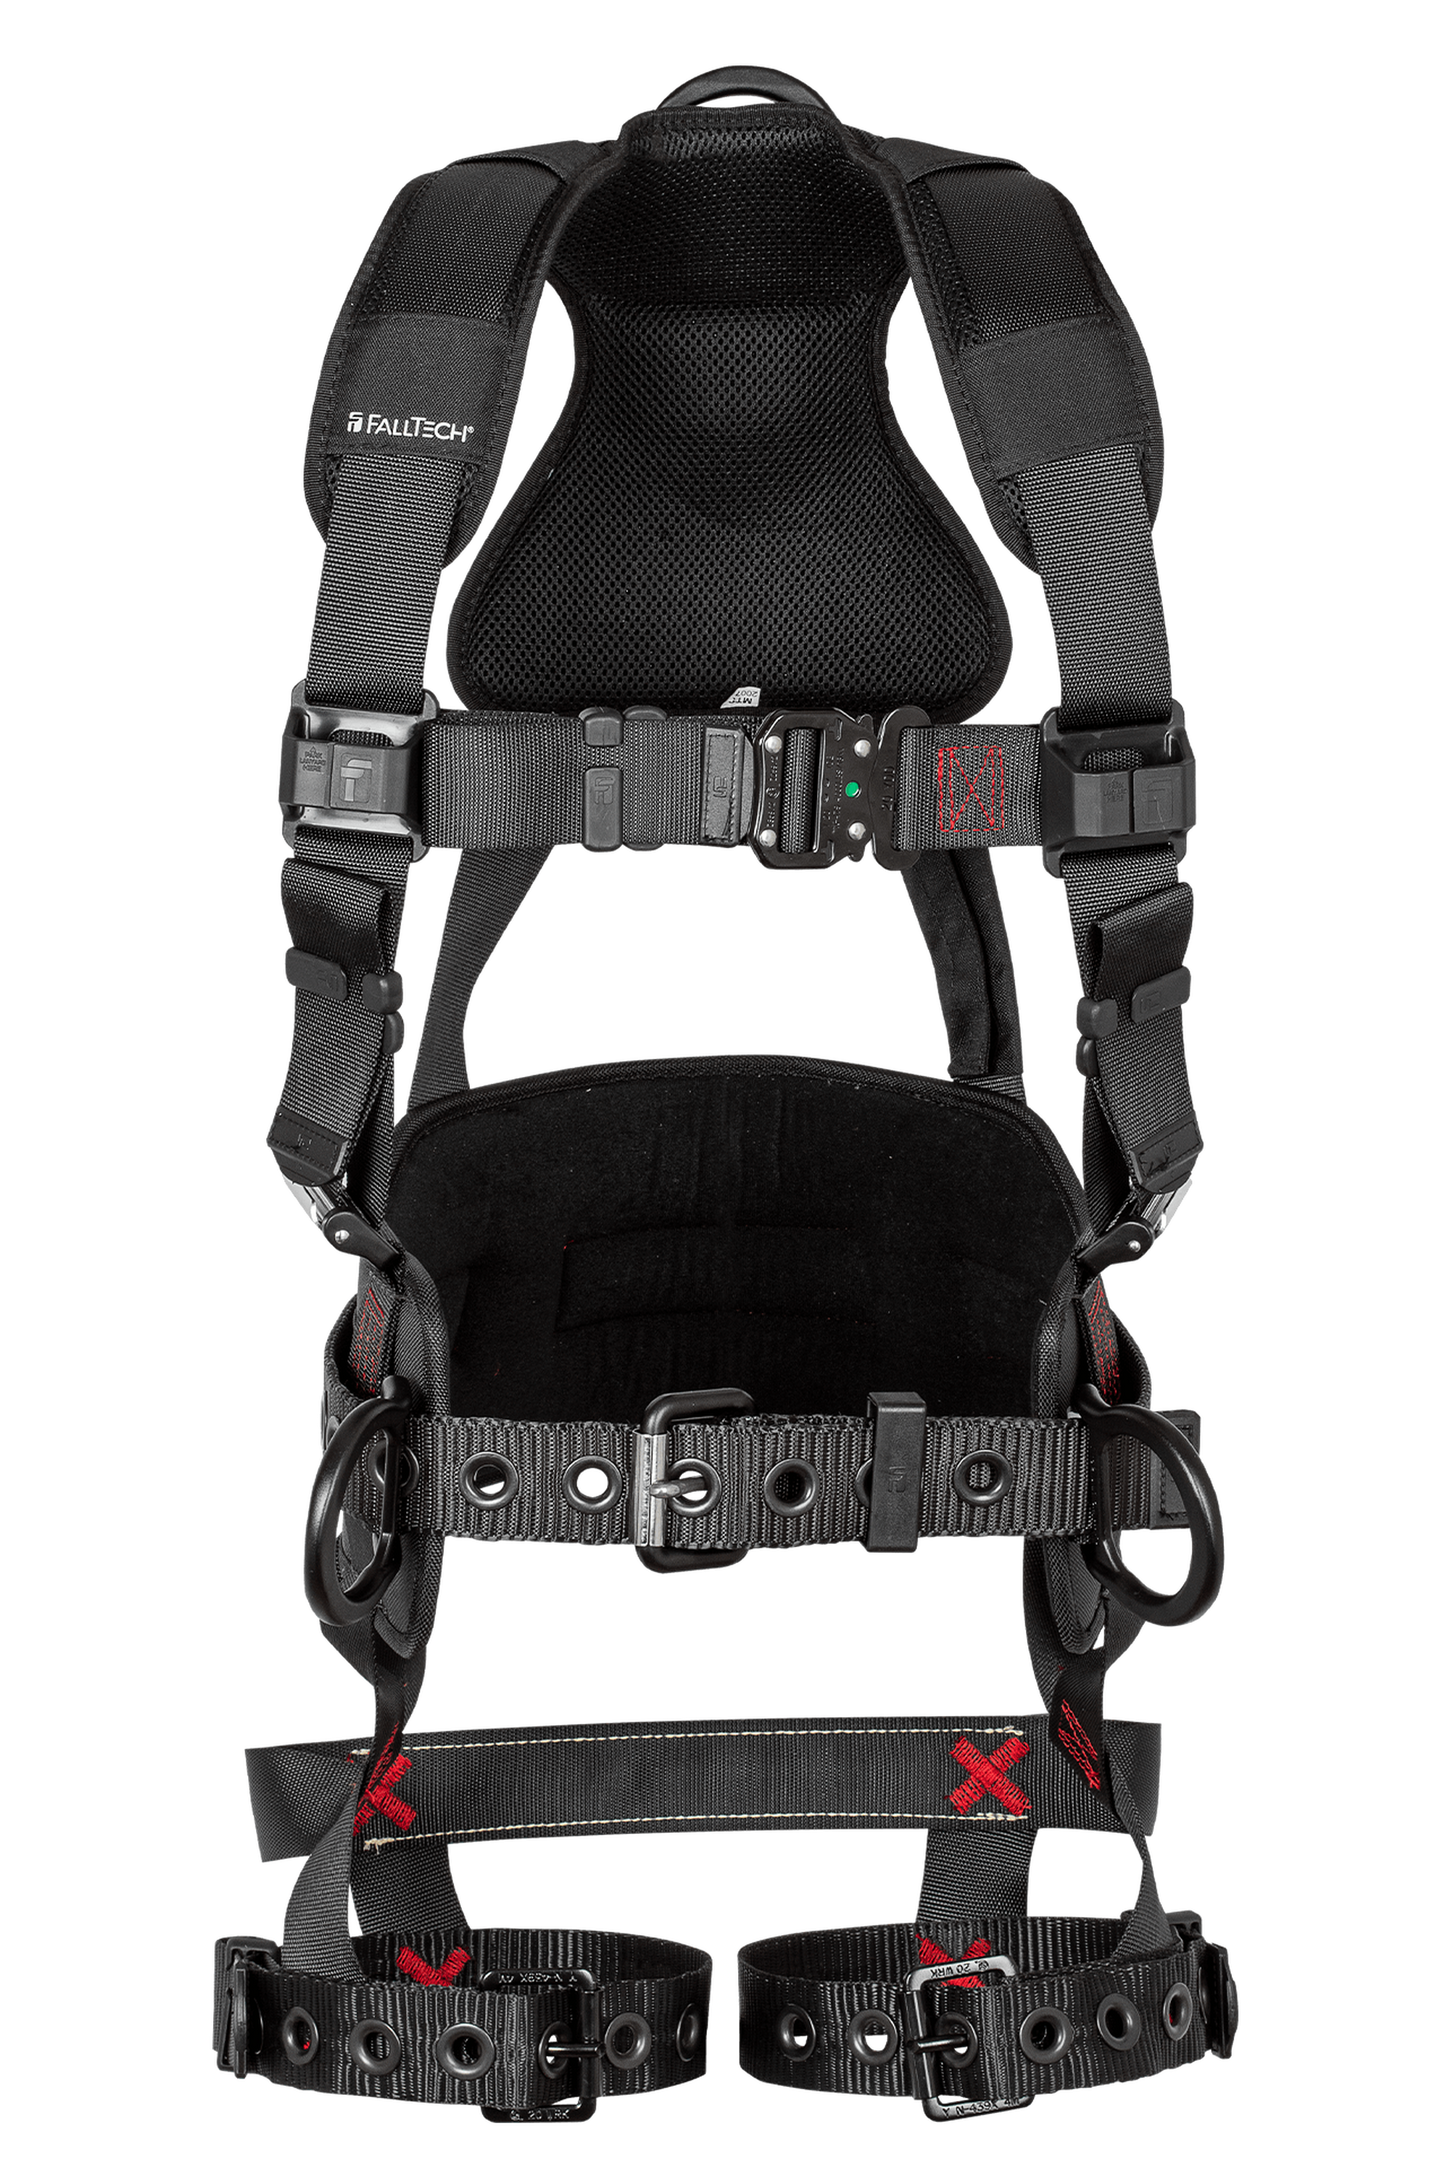 FT-Iron 3D Construction Belted Full Body Harness, Tongue Buckle Leg Adjustment